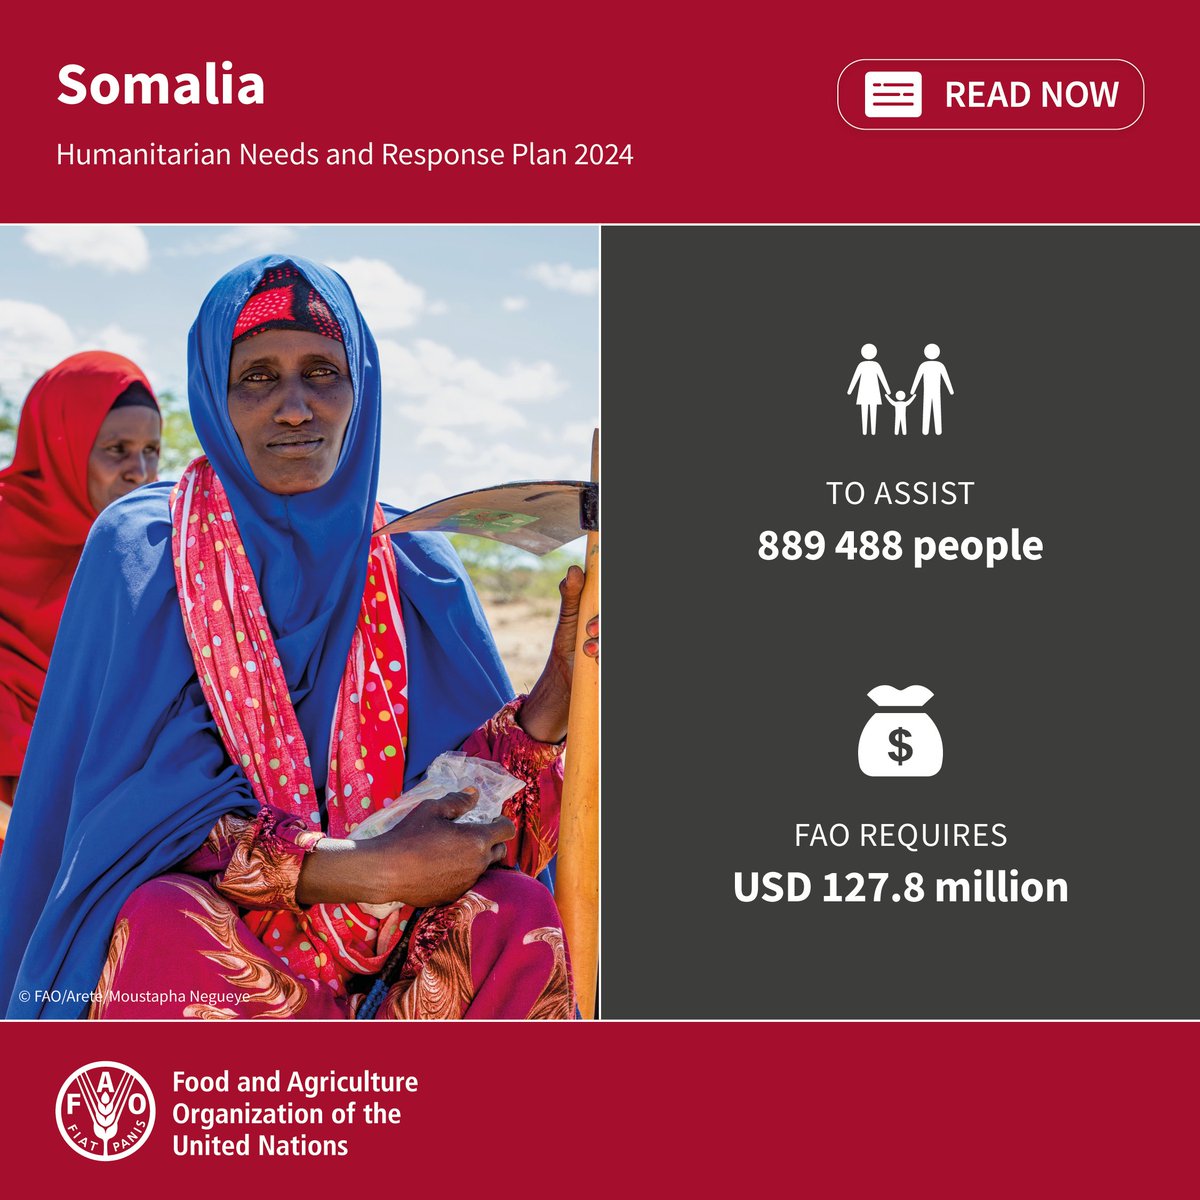 Within a year, Somalia went from averting a famine caused by it's longest drought to the worst flooding on record. Combined humanitarian and resilience interventions are urgently needed to save lives and strengthen communities’ capacities to adapt. bit.ly/4b8Bd4I